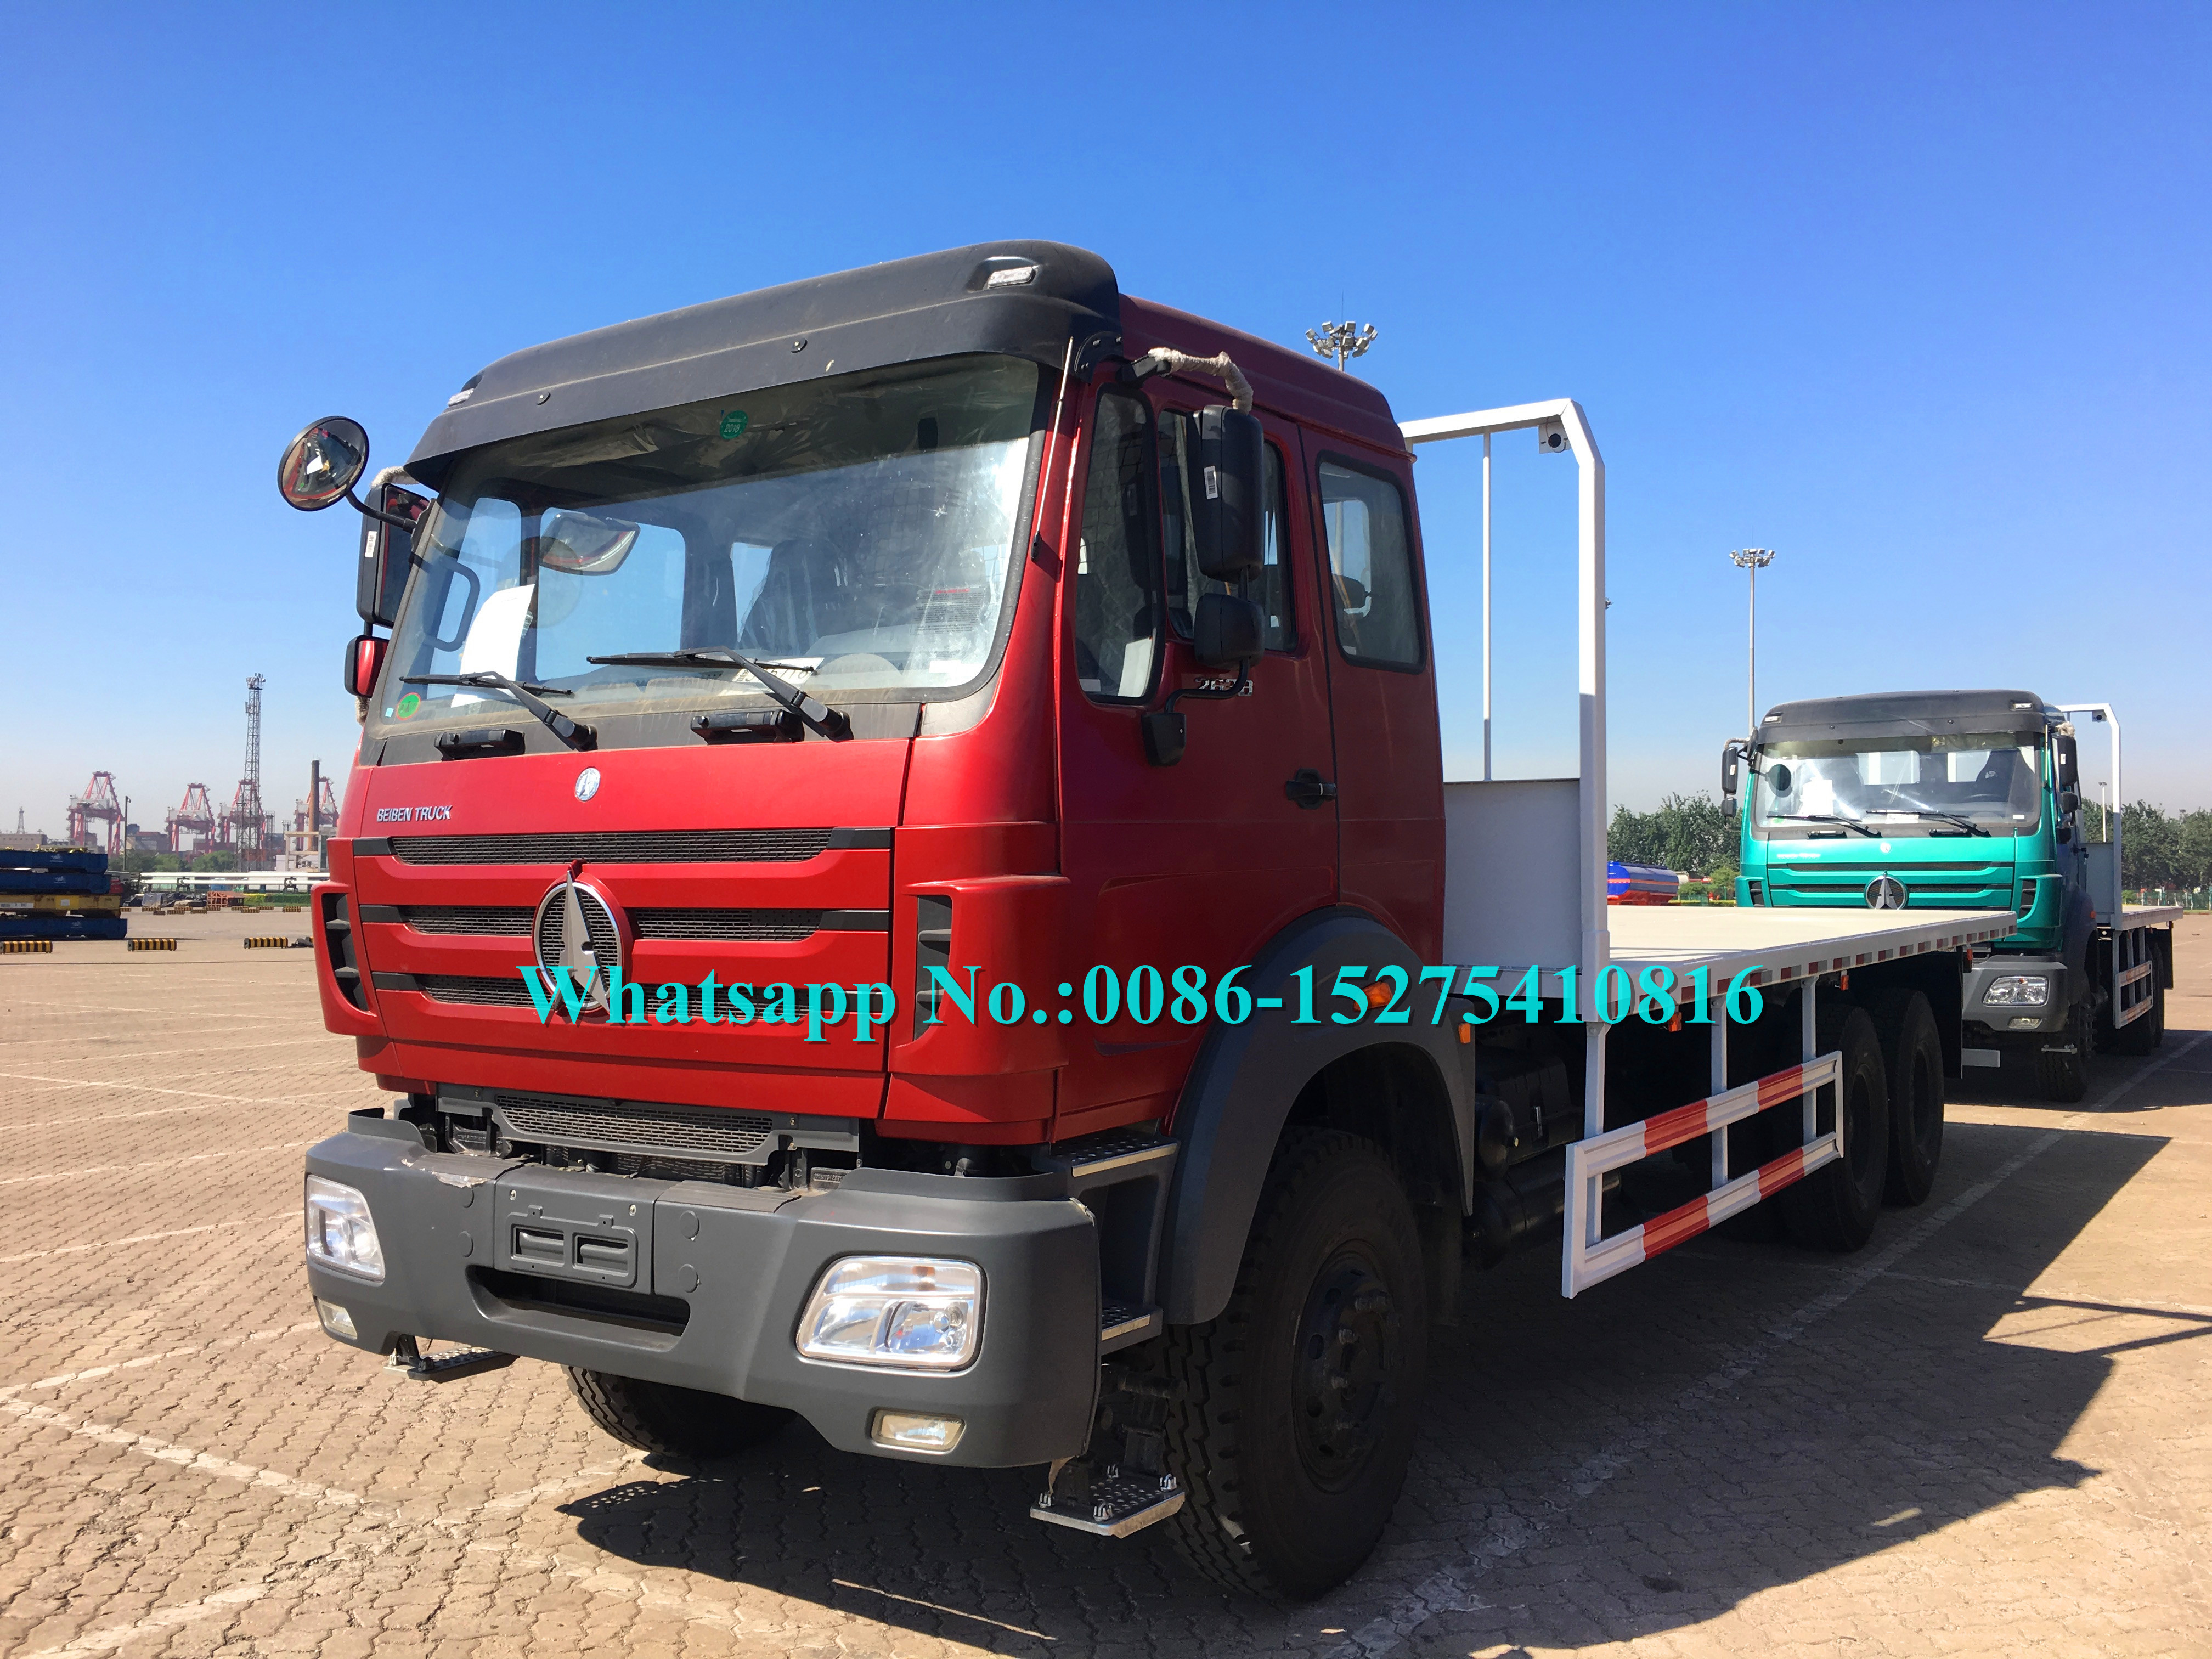 Red color Beiben 6x6 2638PZ 30Ton 380hp10 wheeler Cross country Container Flat Bed Truck adopt Germany Benz Technology